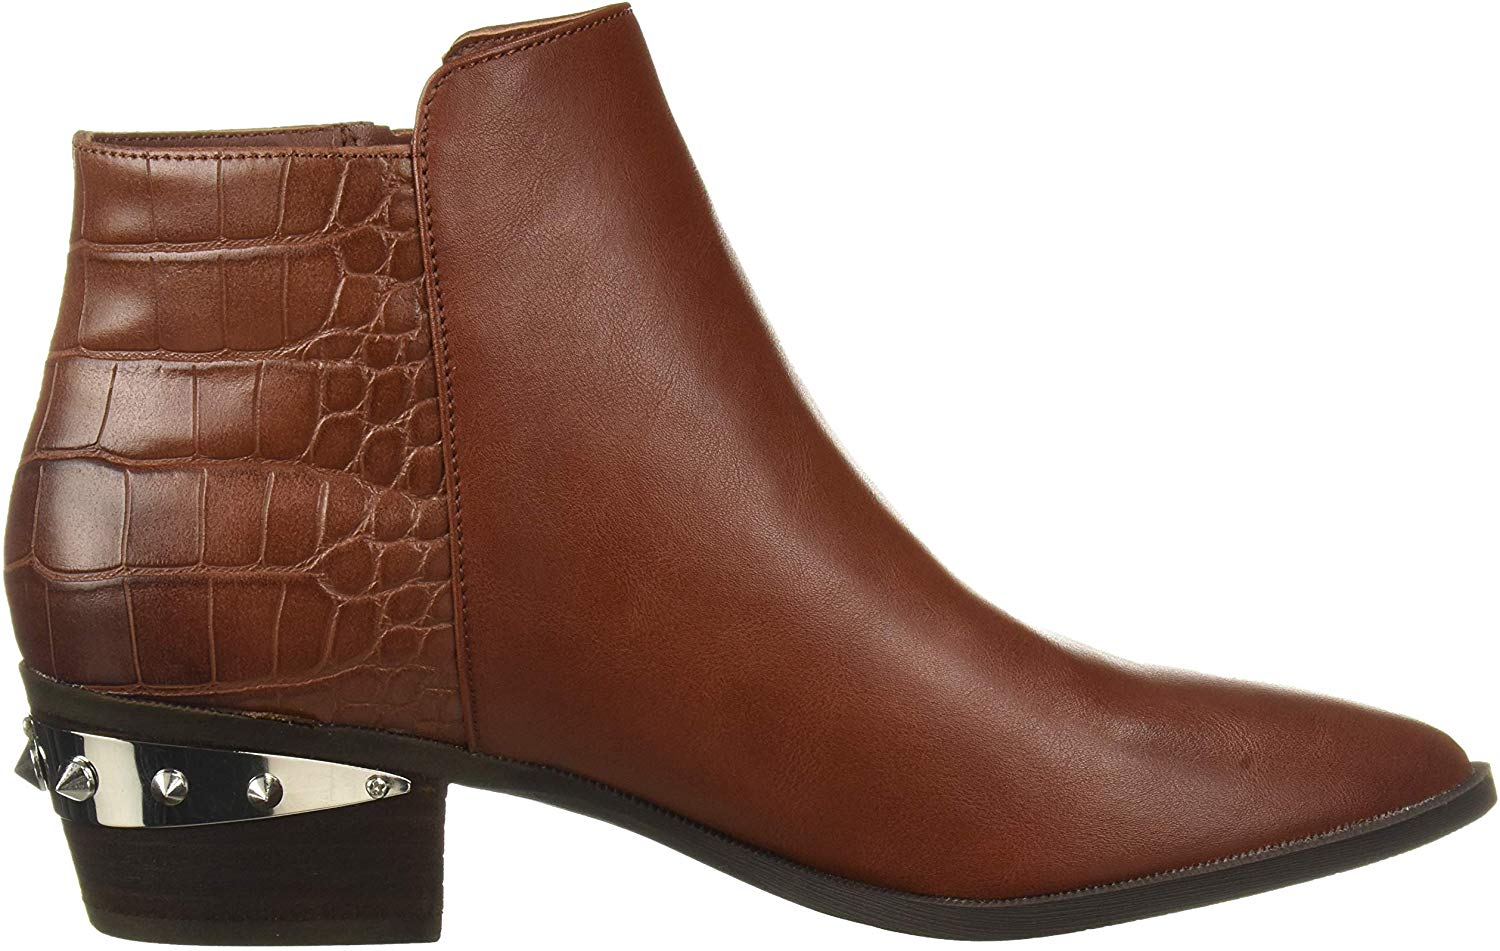 Circus by Sam Edelman Women's Shoes Highland Ankle Boot, Whiskey, Size ...